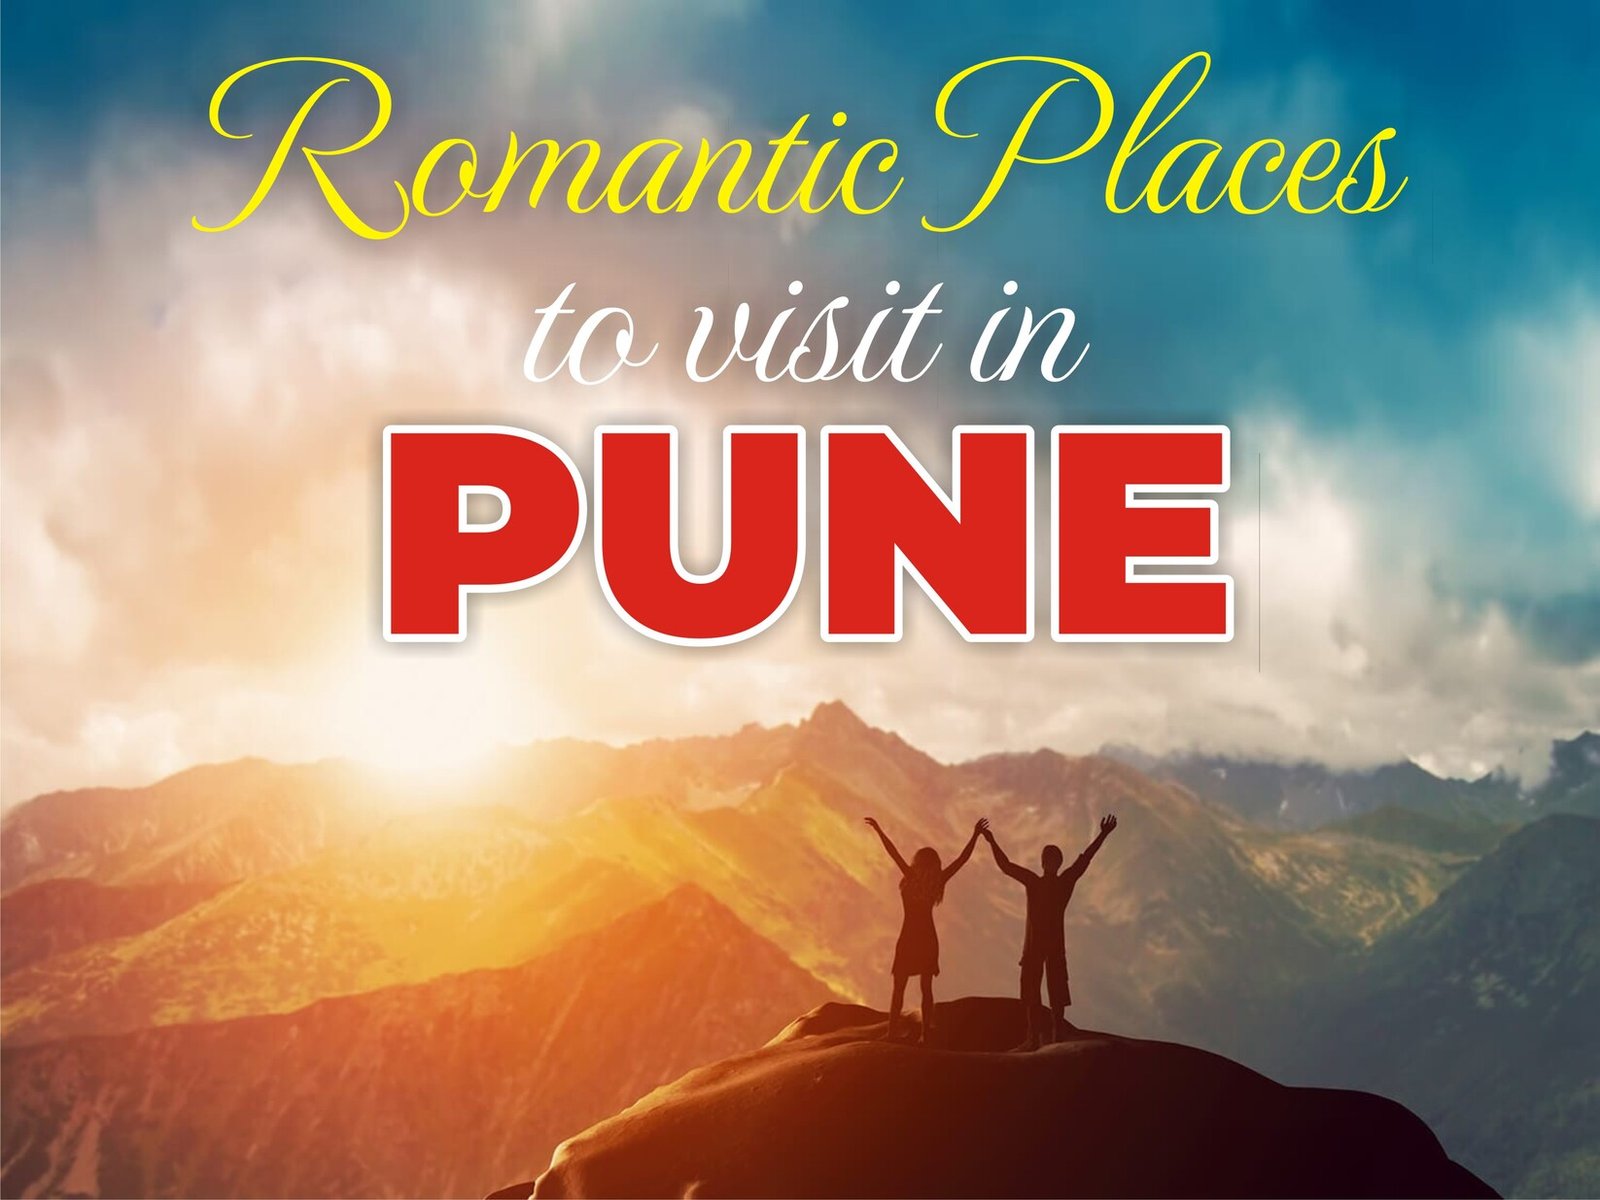 Romantic place to visit in pune